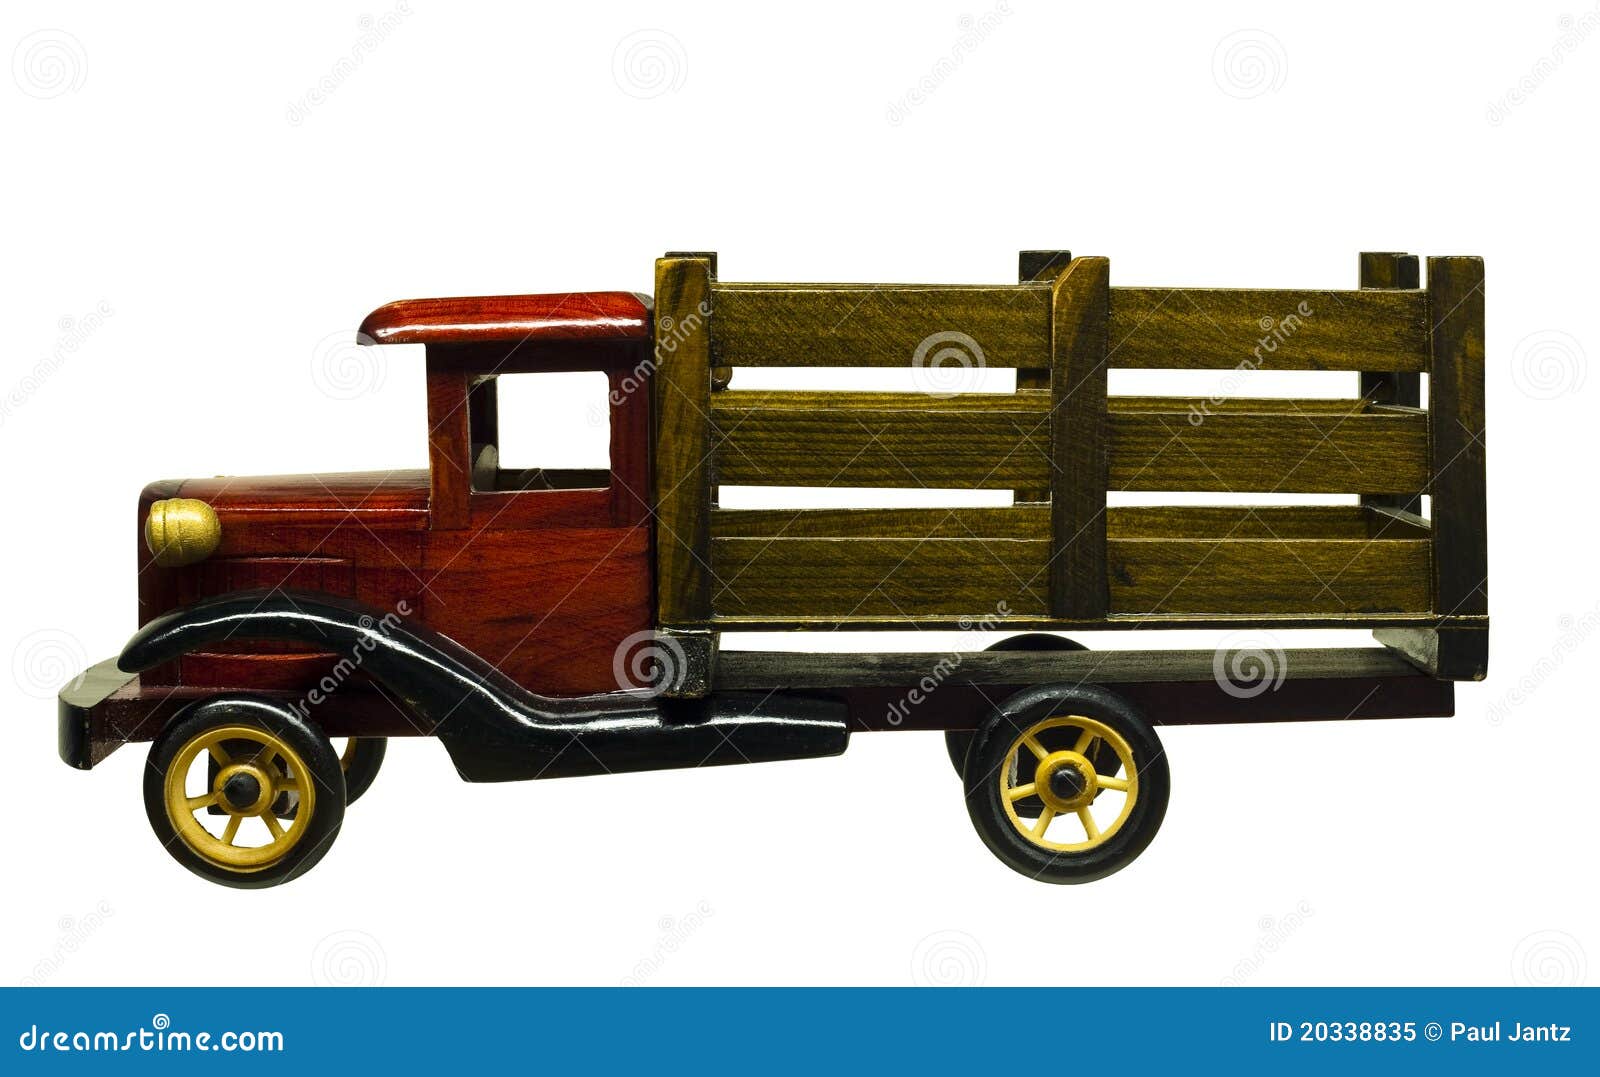 Fe Guide Building : Wooden toy trucks plans free Here